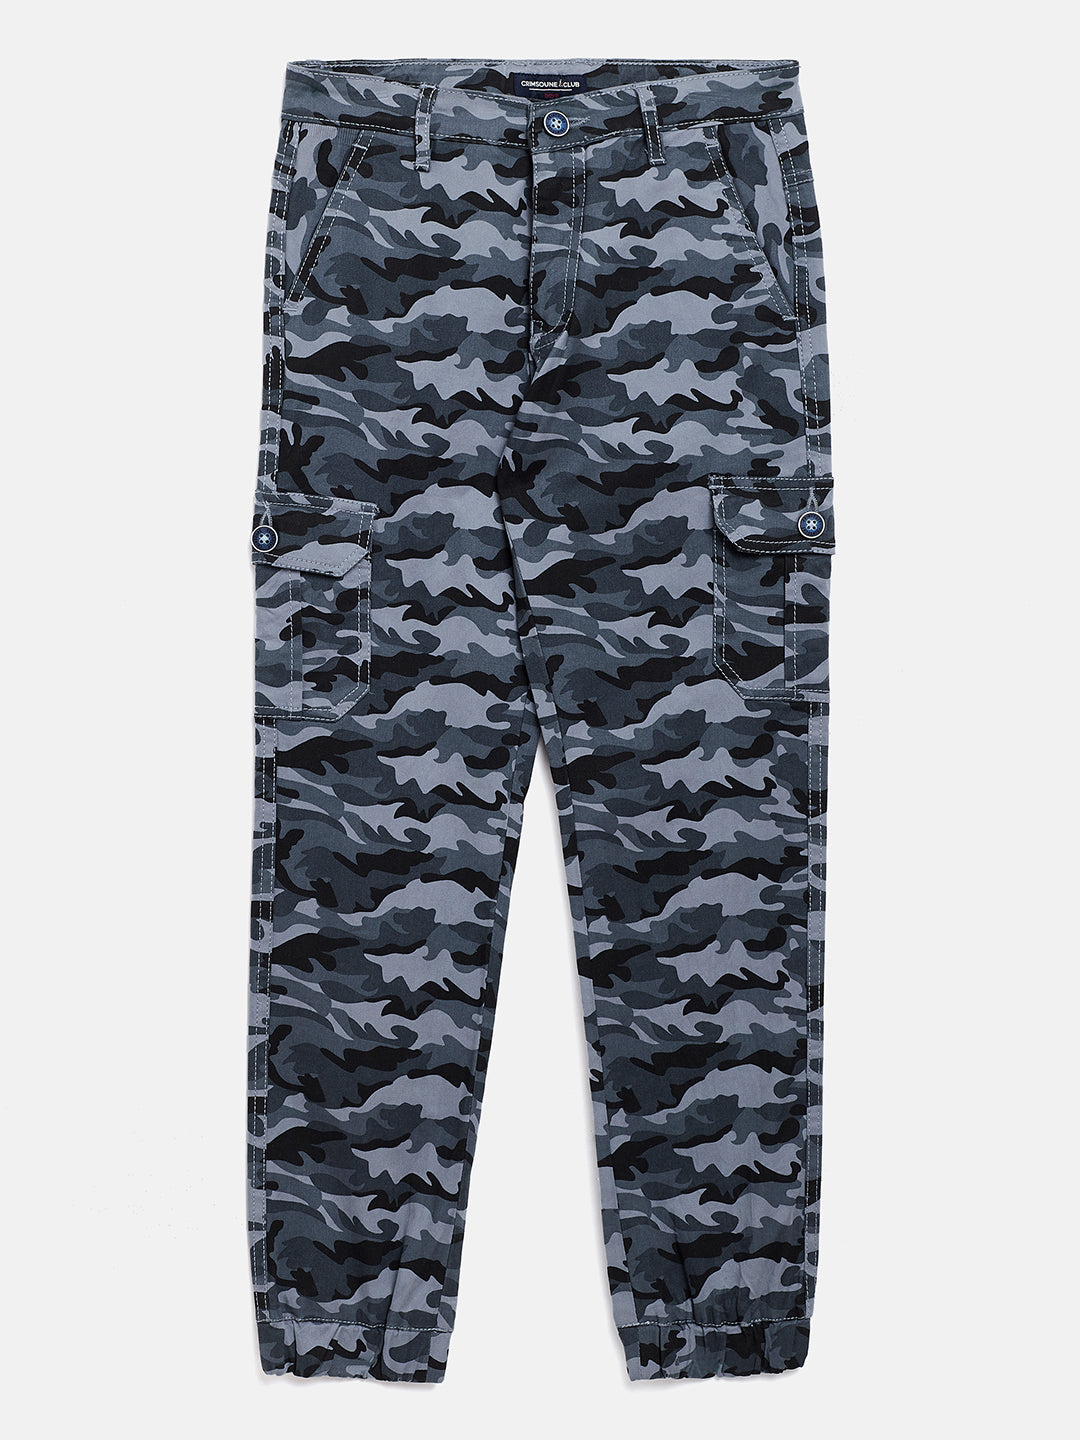 Grey Camouflage Trousers - Boys Trousers